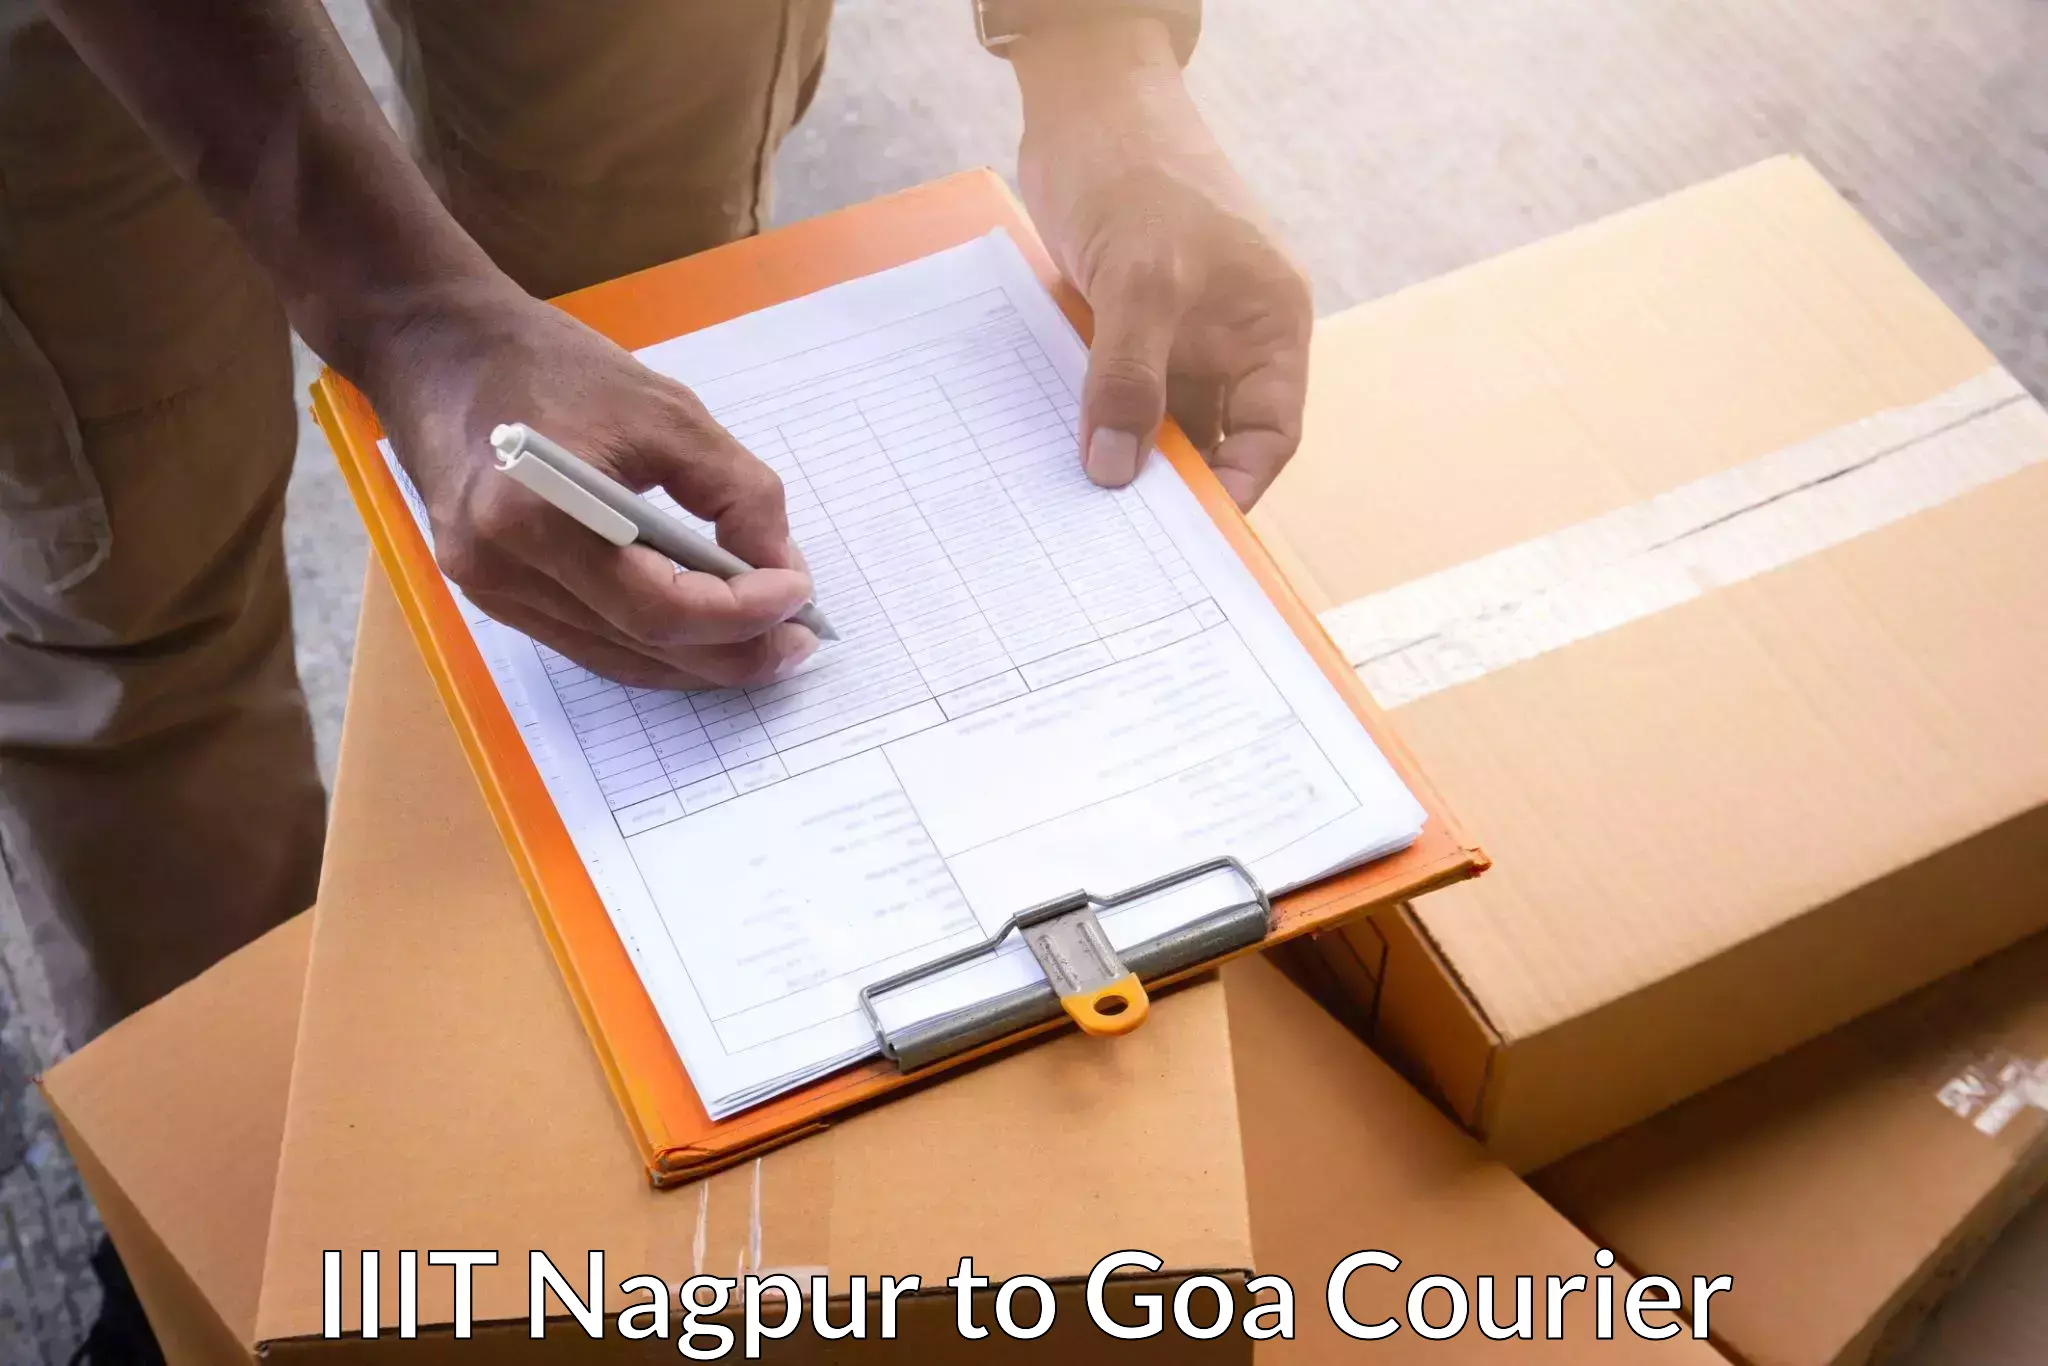 Package delivery network IIIT Nagpur to Goa University